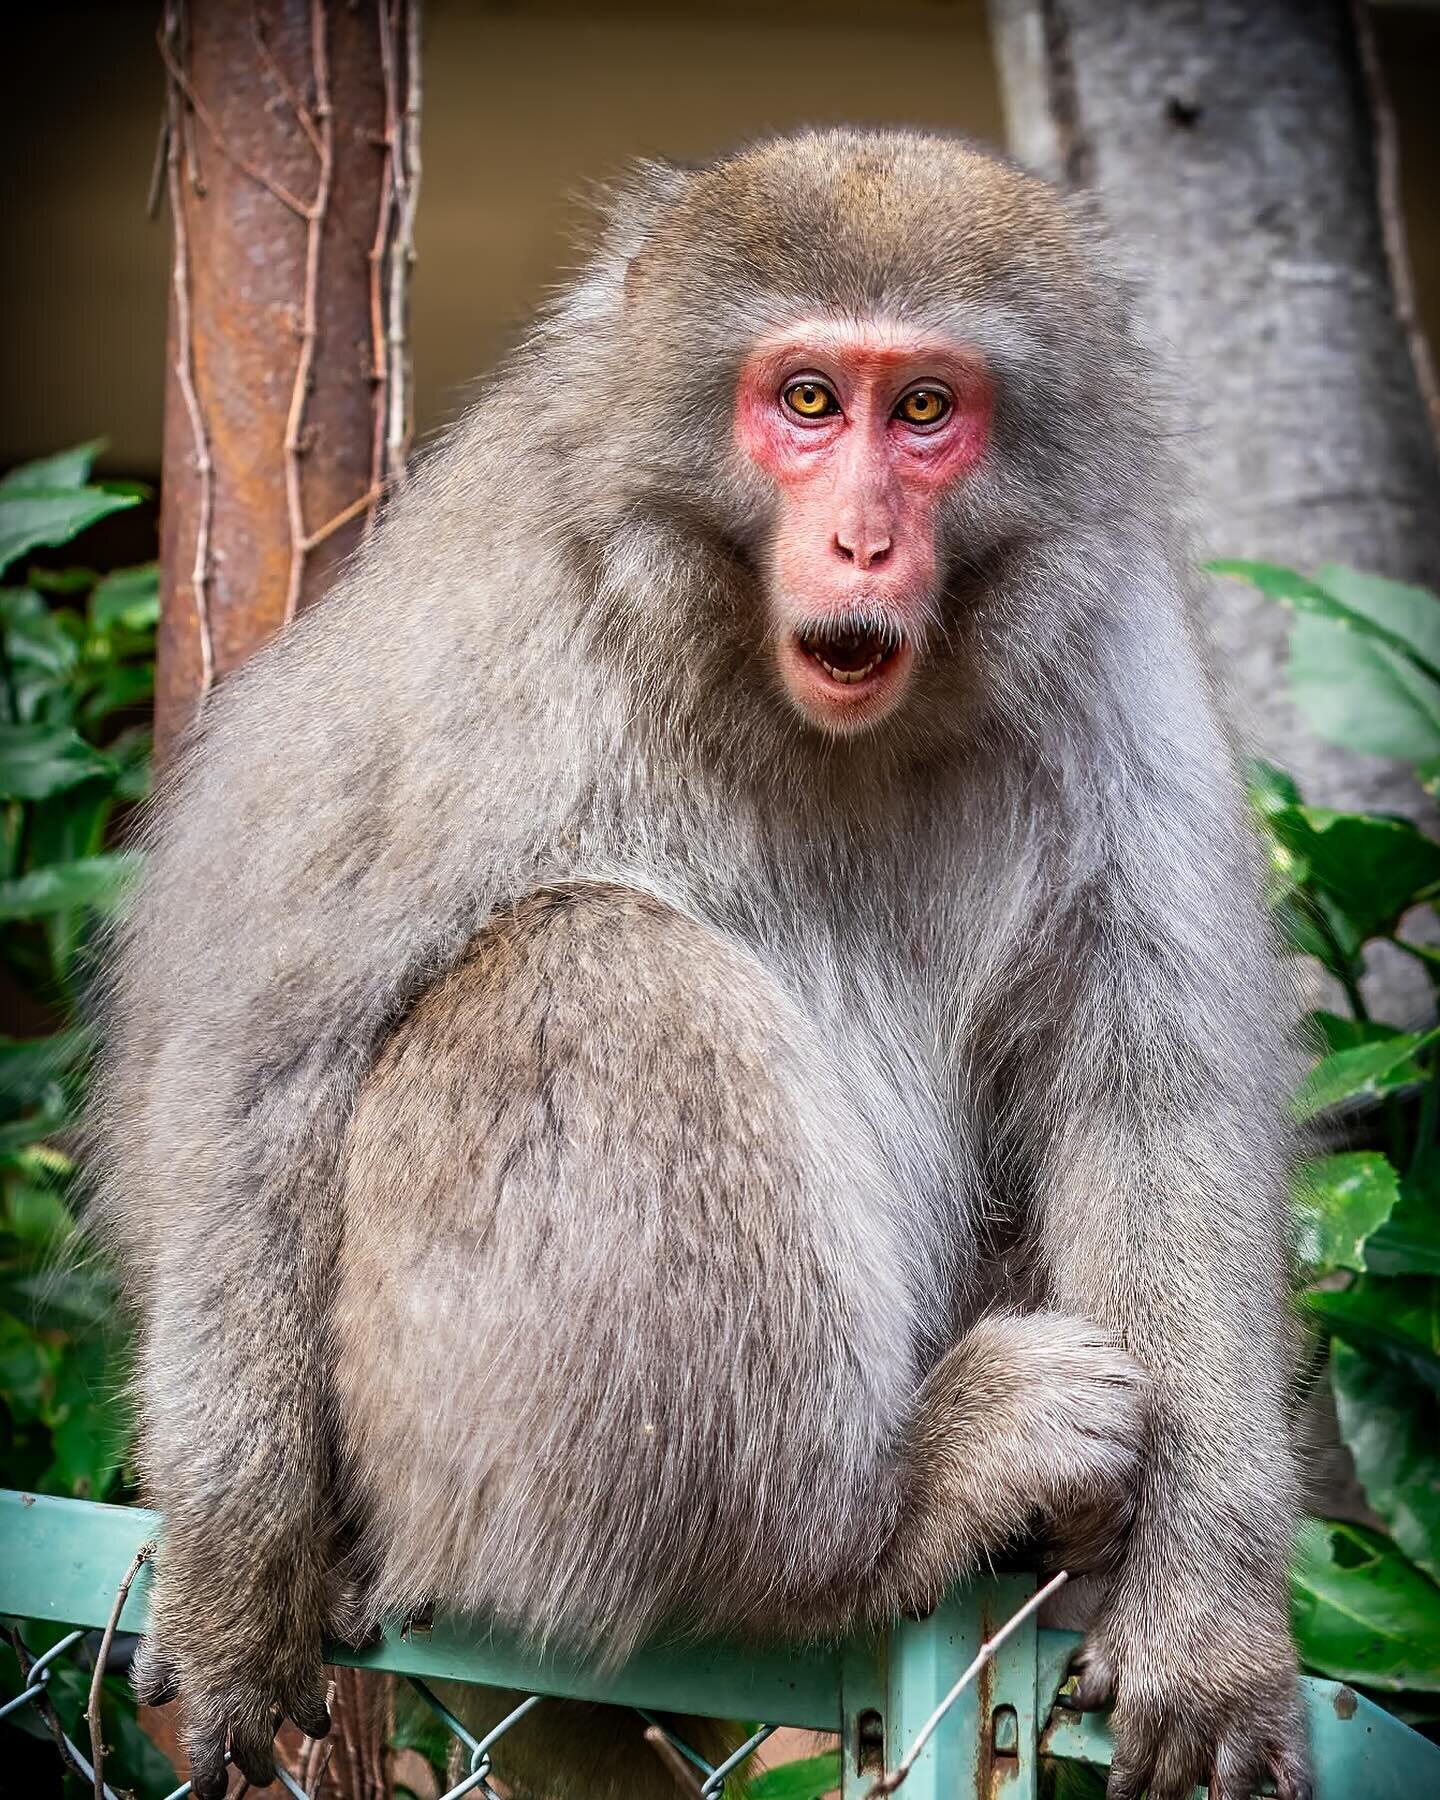 Locals only
&bull;
While exploring the spooky abandoned section of Kinugawa Onsen, @elevensunisa and I were approached by a troop of #Nihonzaru #ニホンザル or #Japanese #macaques as they emerged from one of the derelict buildings. 
They stopped to inspect